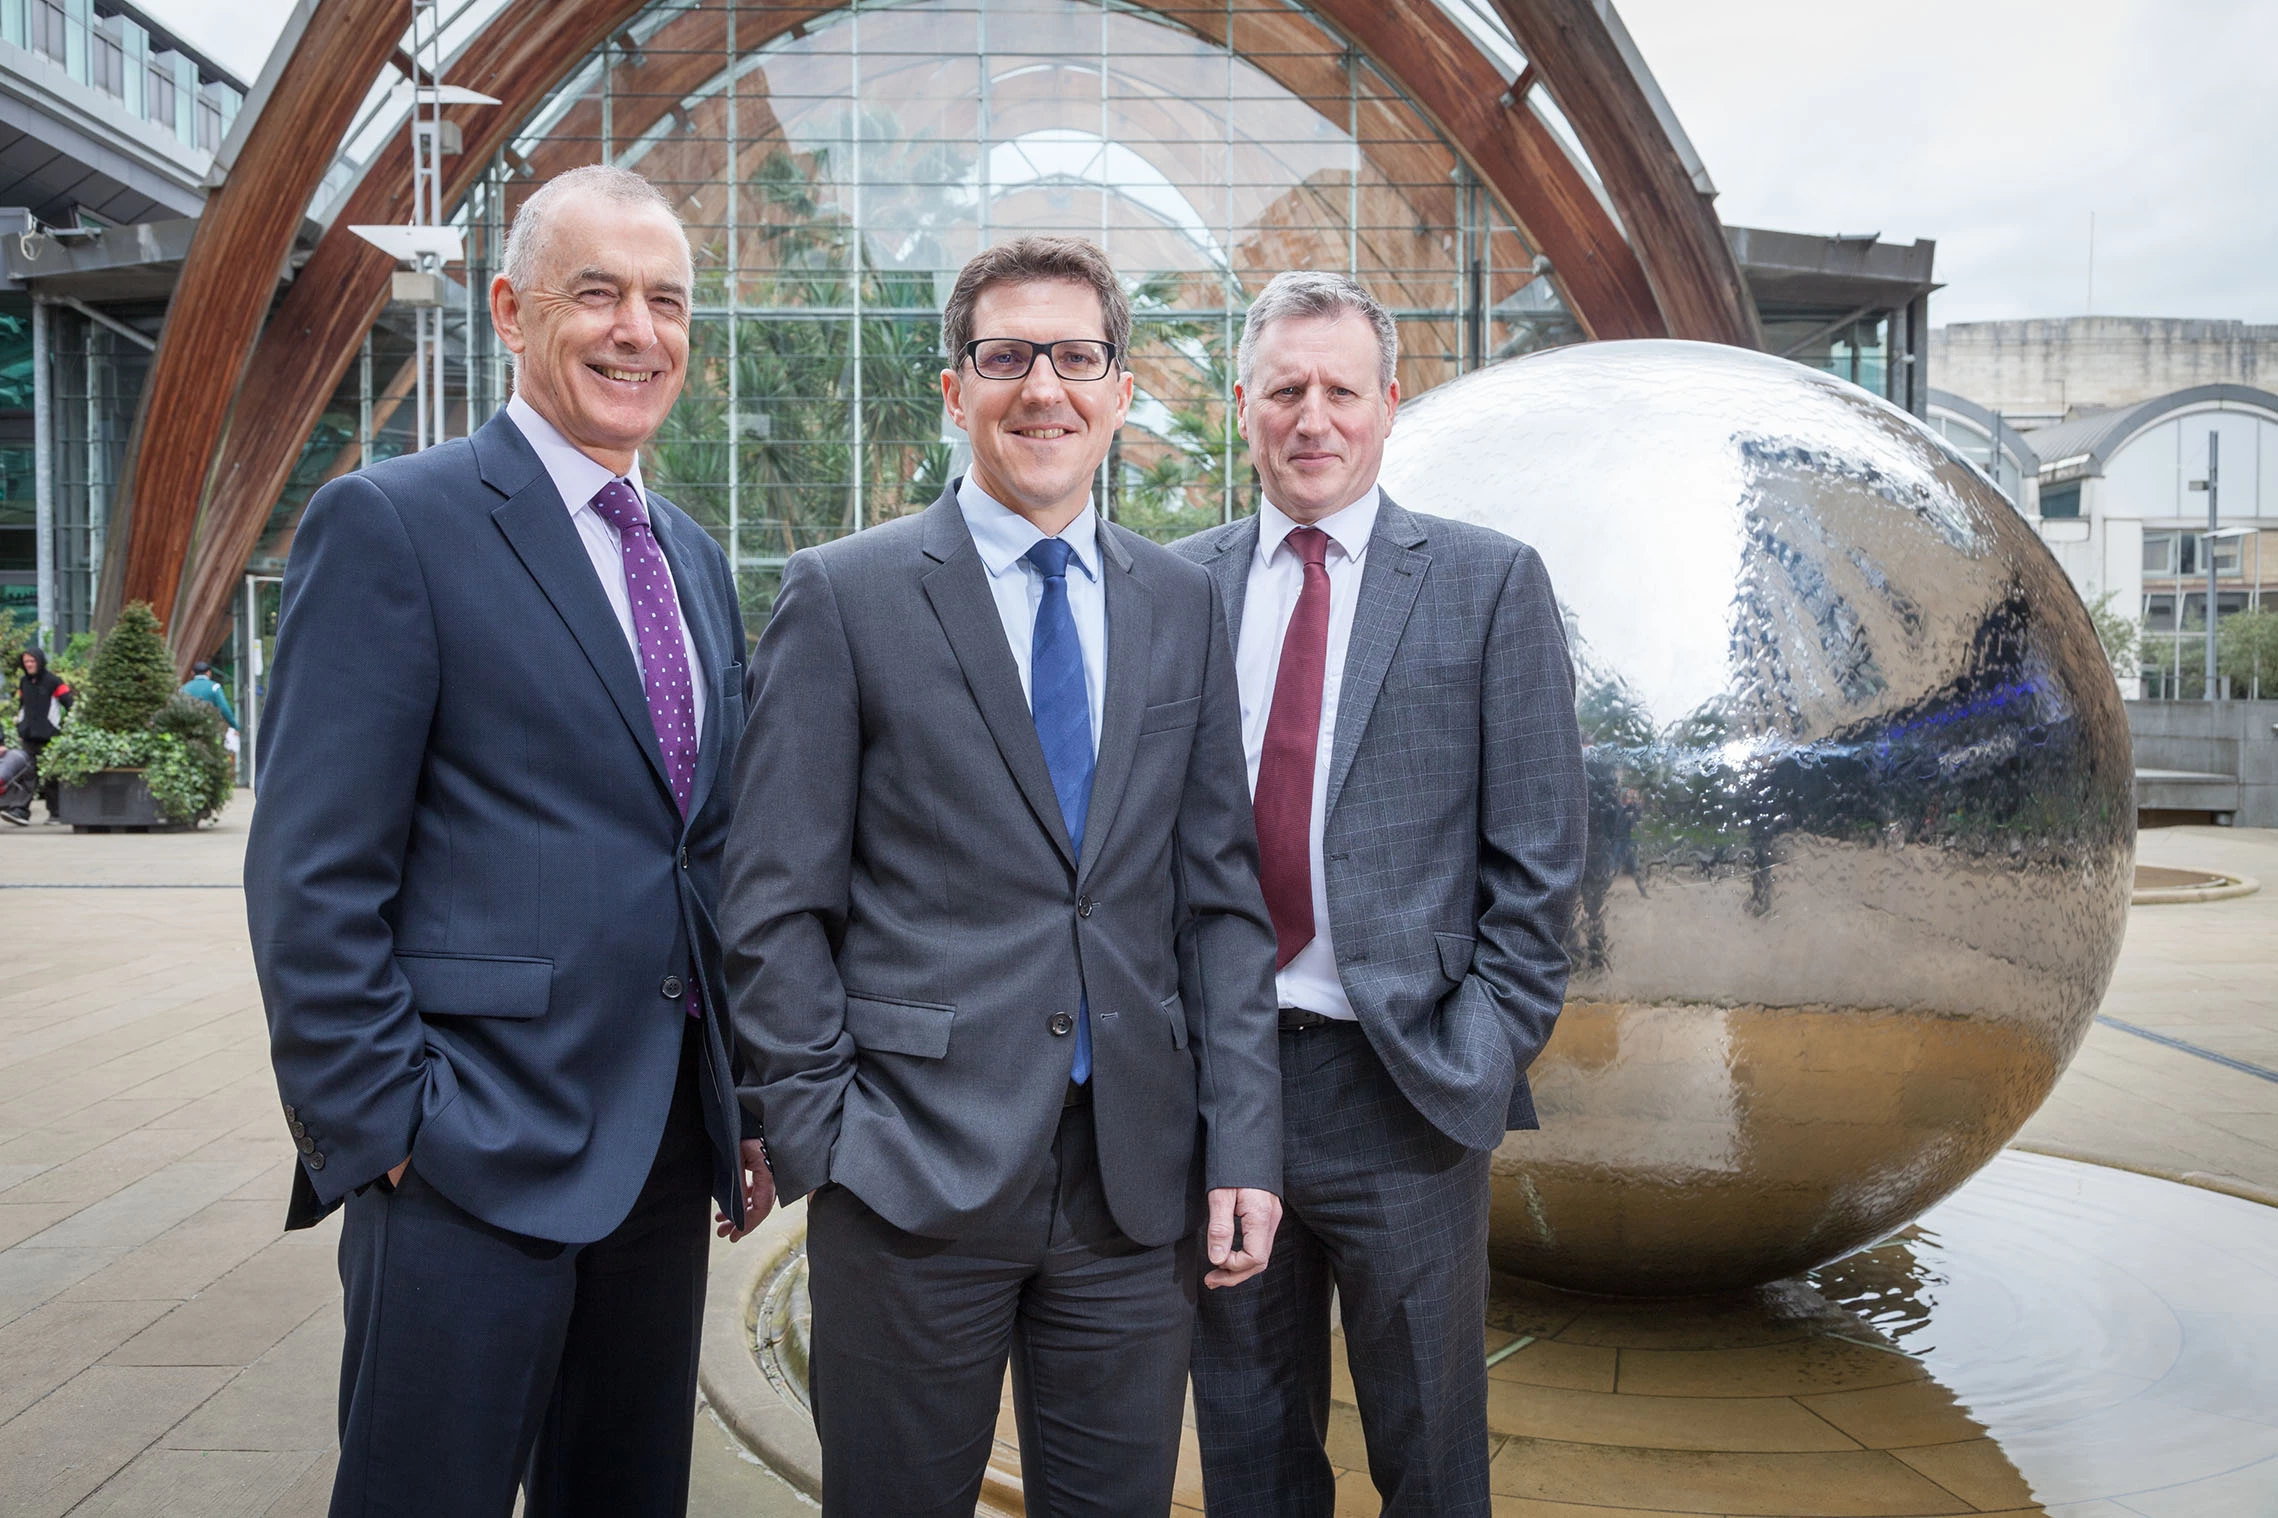 Taylor&Emmet's new property consultants, John Outram (left) and Steve Hinshelwood (right) with head of department, Neil Riley. 